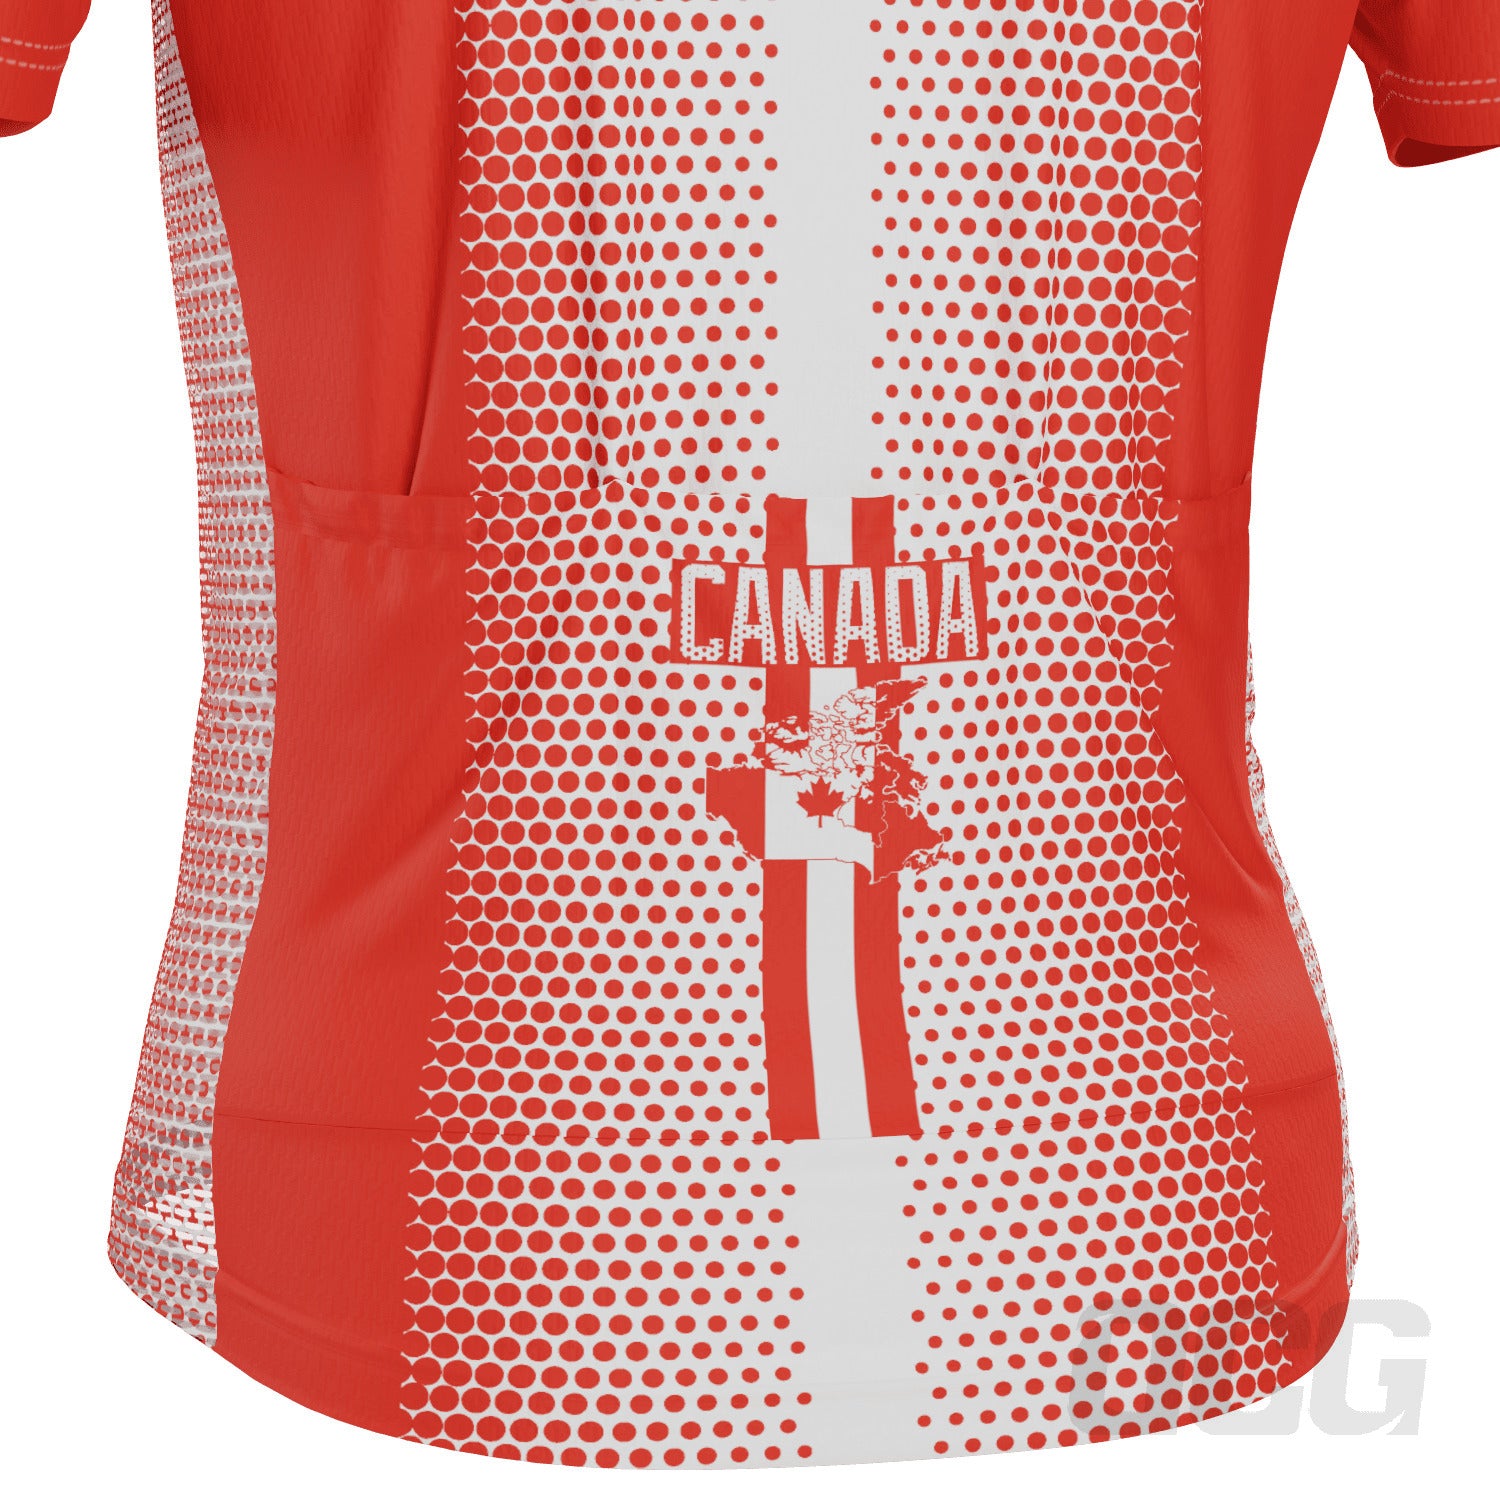 Men's World Countries Team Canada Icon Short Sleeve Cycling Jersey